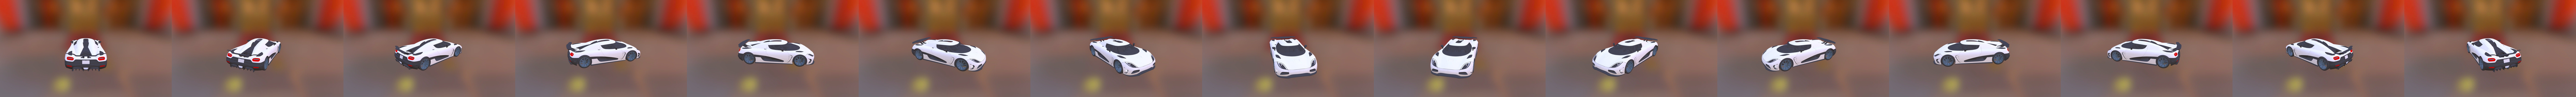 Koenigsegg Agera R Download Free 3d Model By Koyd Koyd Af832e3 - roblox koenigsegg agera r